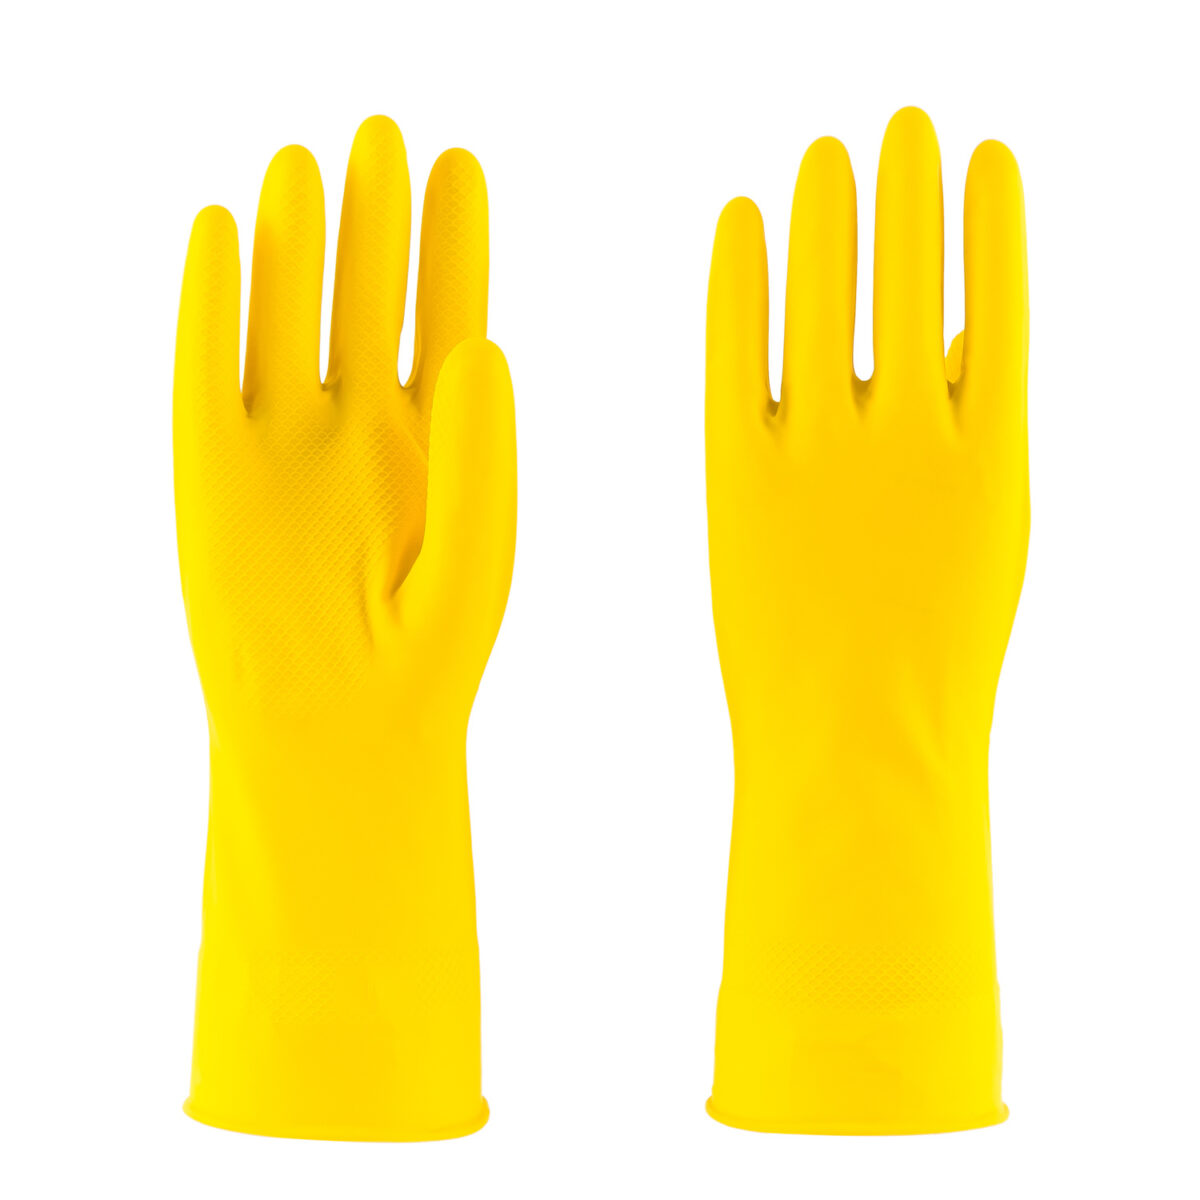 rubber gloves remove pet hair